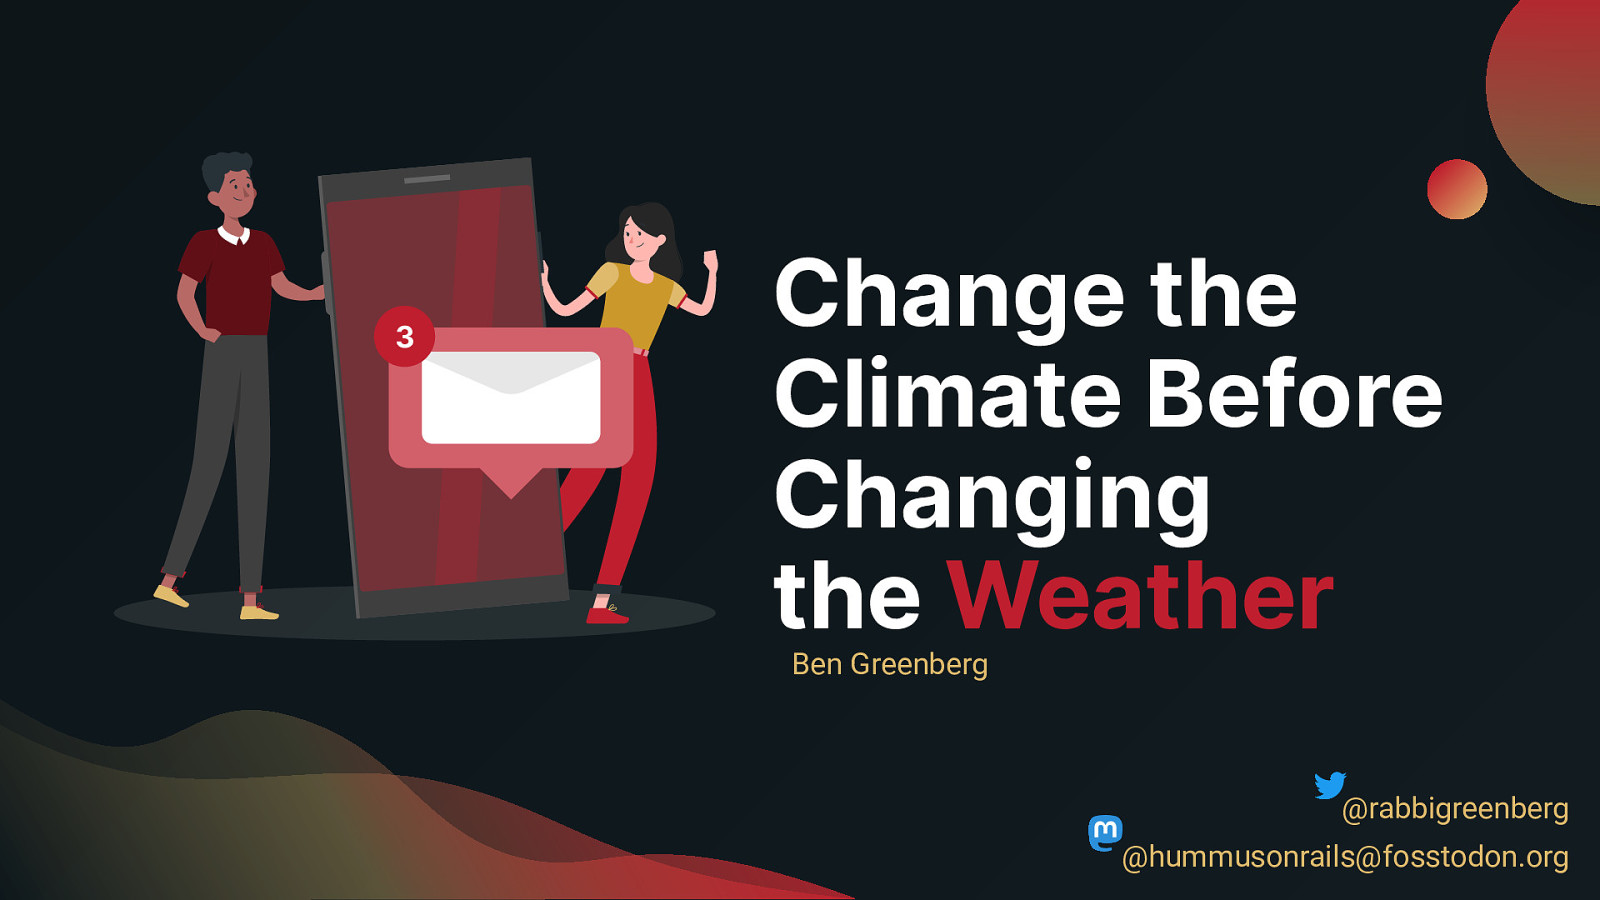 Change the Climate Before Changing the Weather